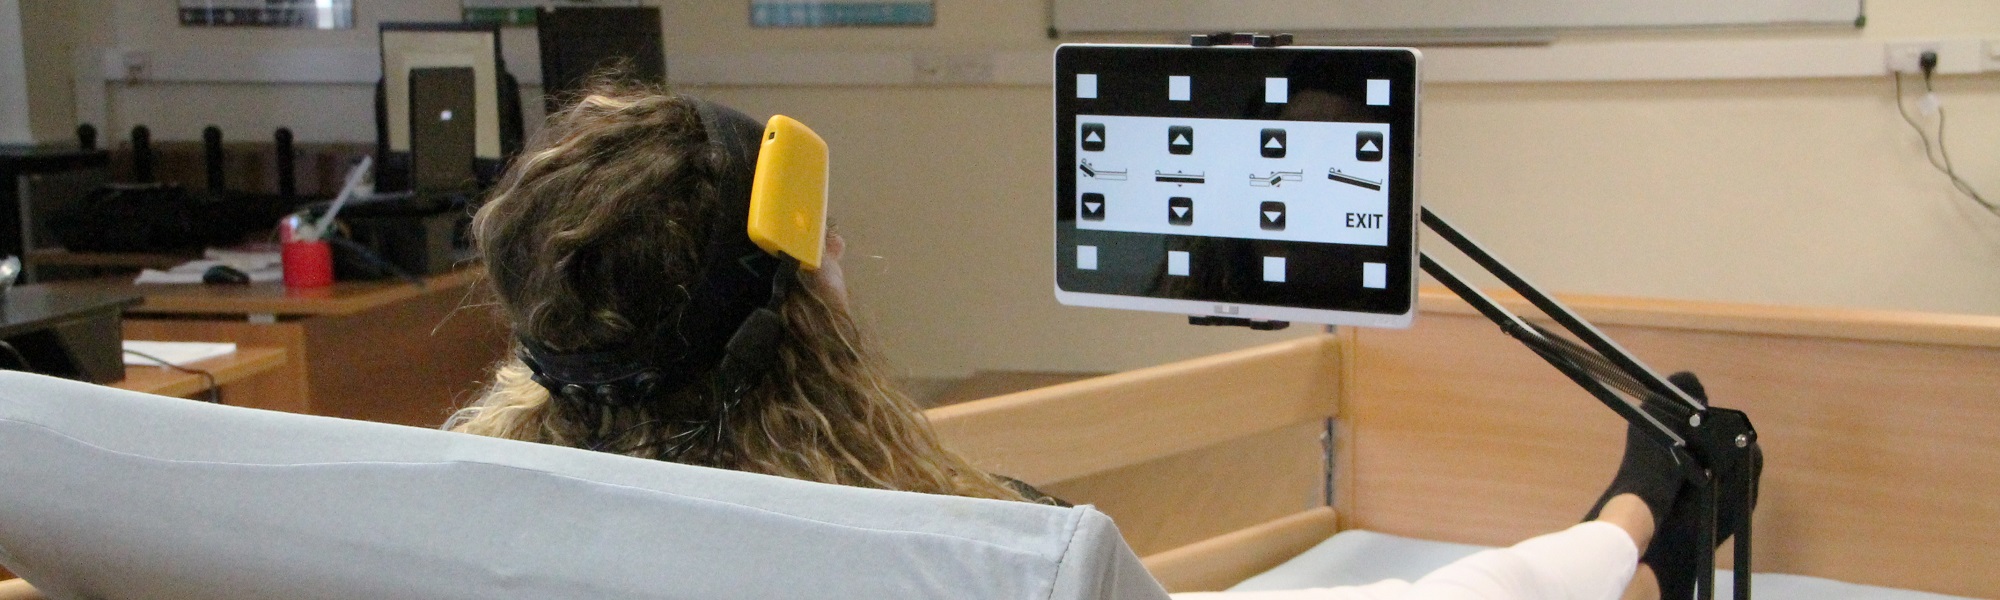 woman in bed controlling equipment using eeg